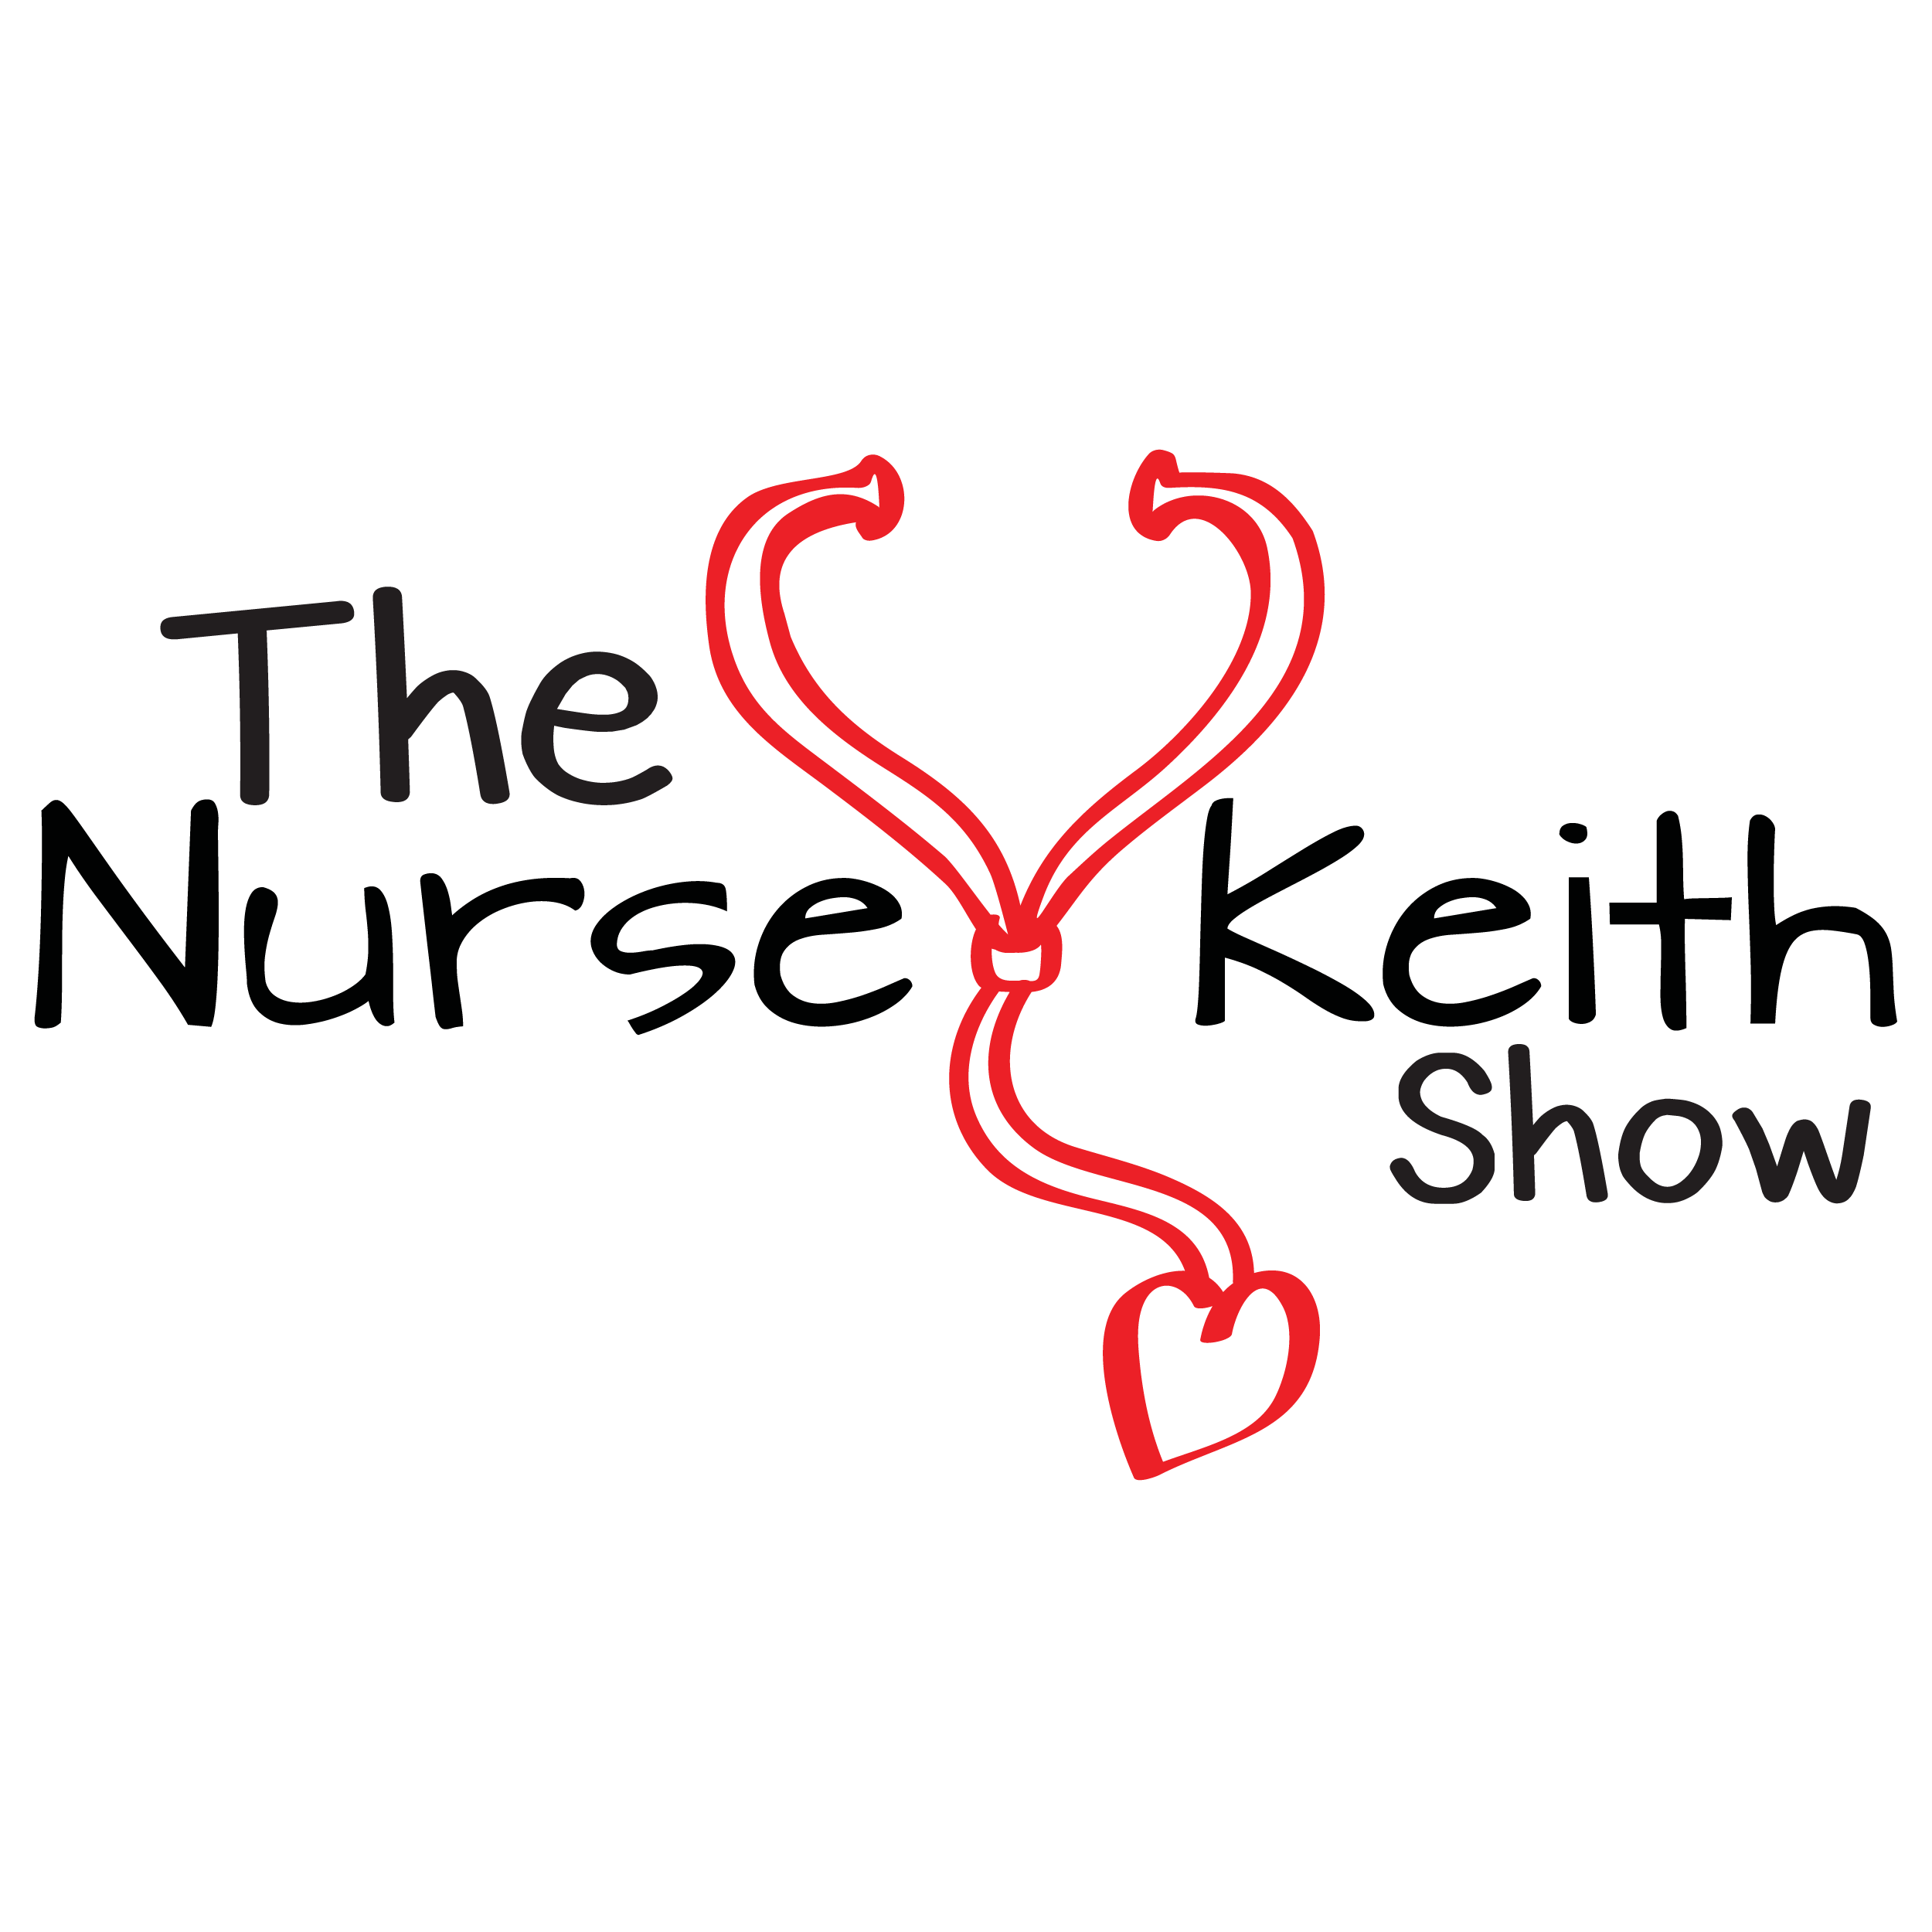 The Nurse Keith Show: When Nurses Champion Justice for the Greater Good